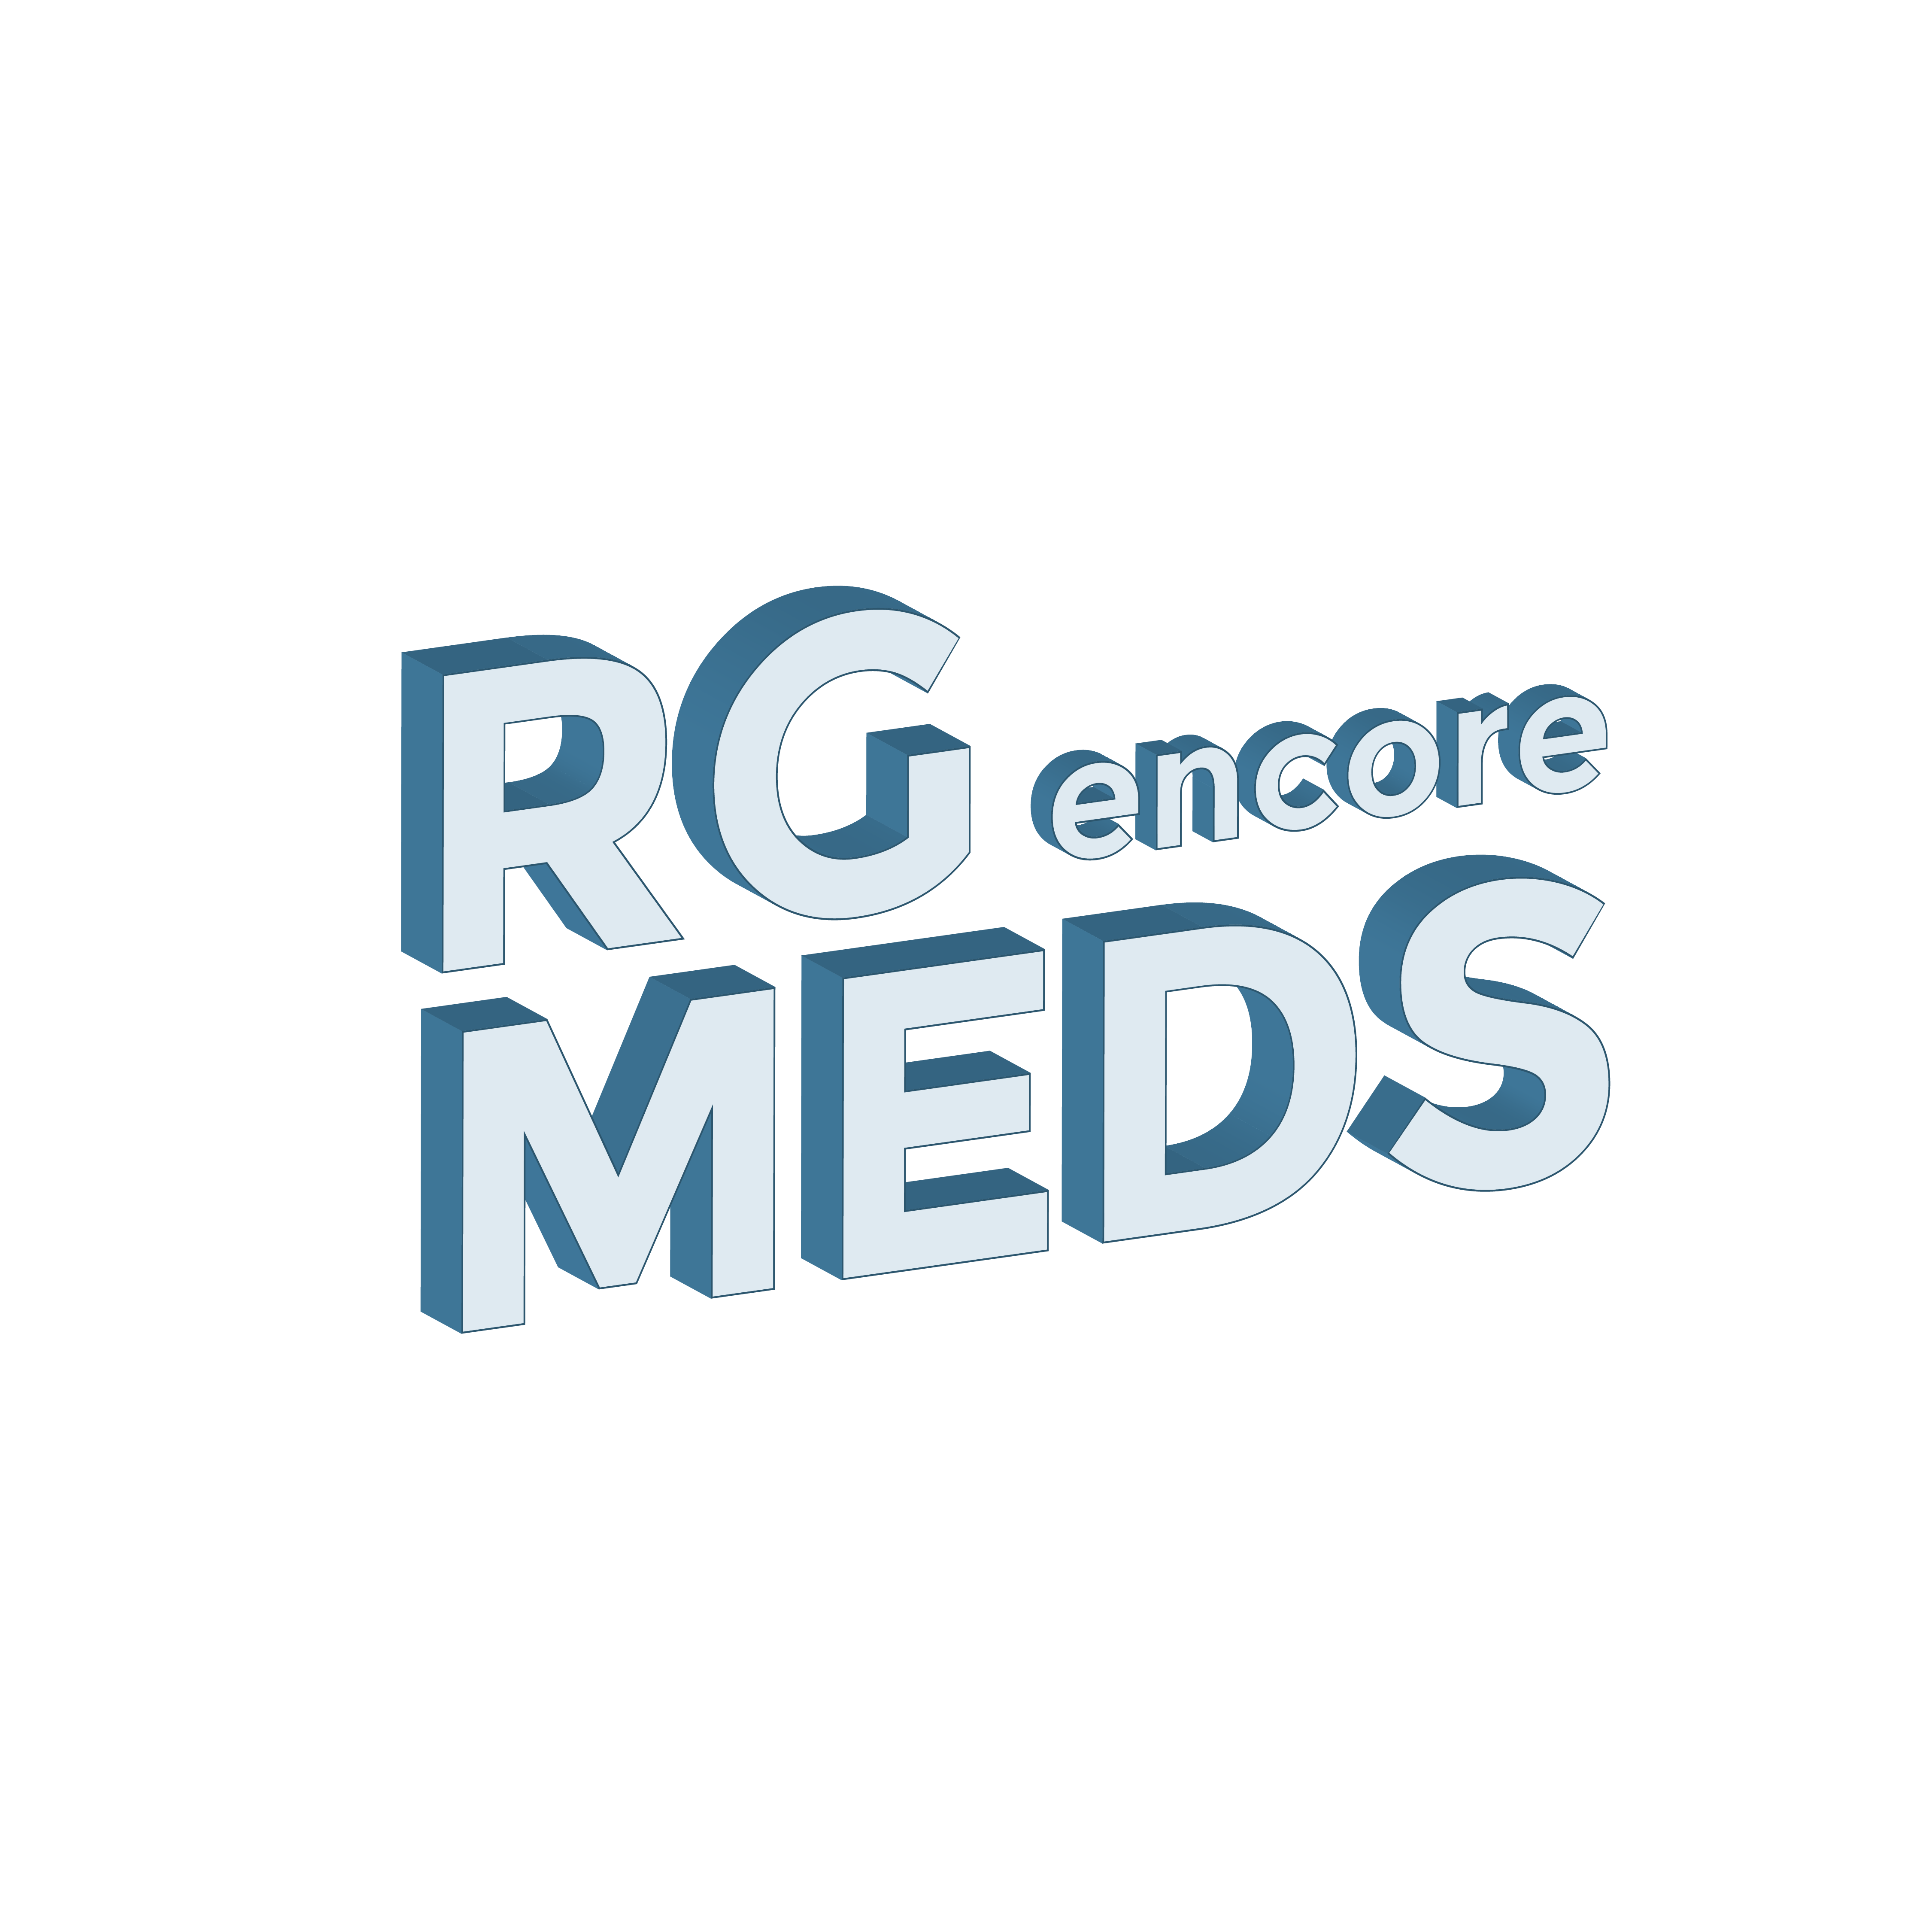 Astrid Rodríguez Launches RG Encore Meds, A New Division For Healthcare And Cosmetics Providers